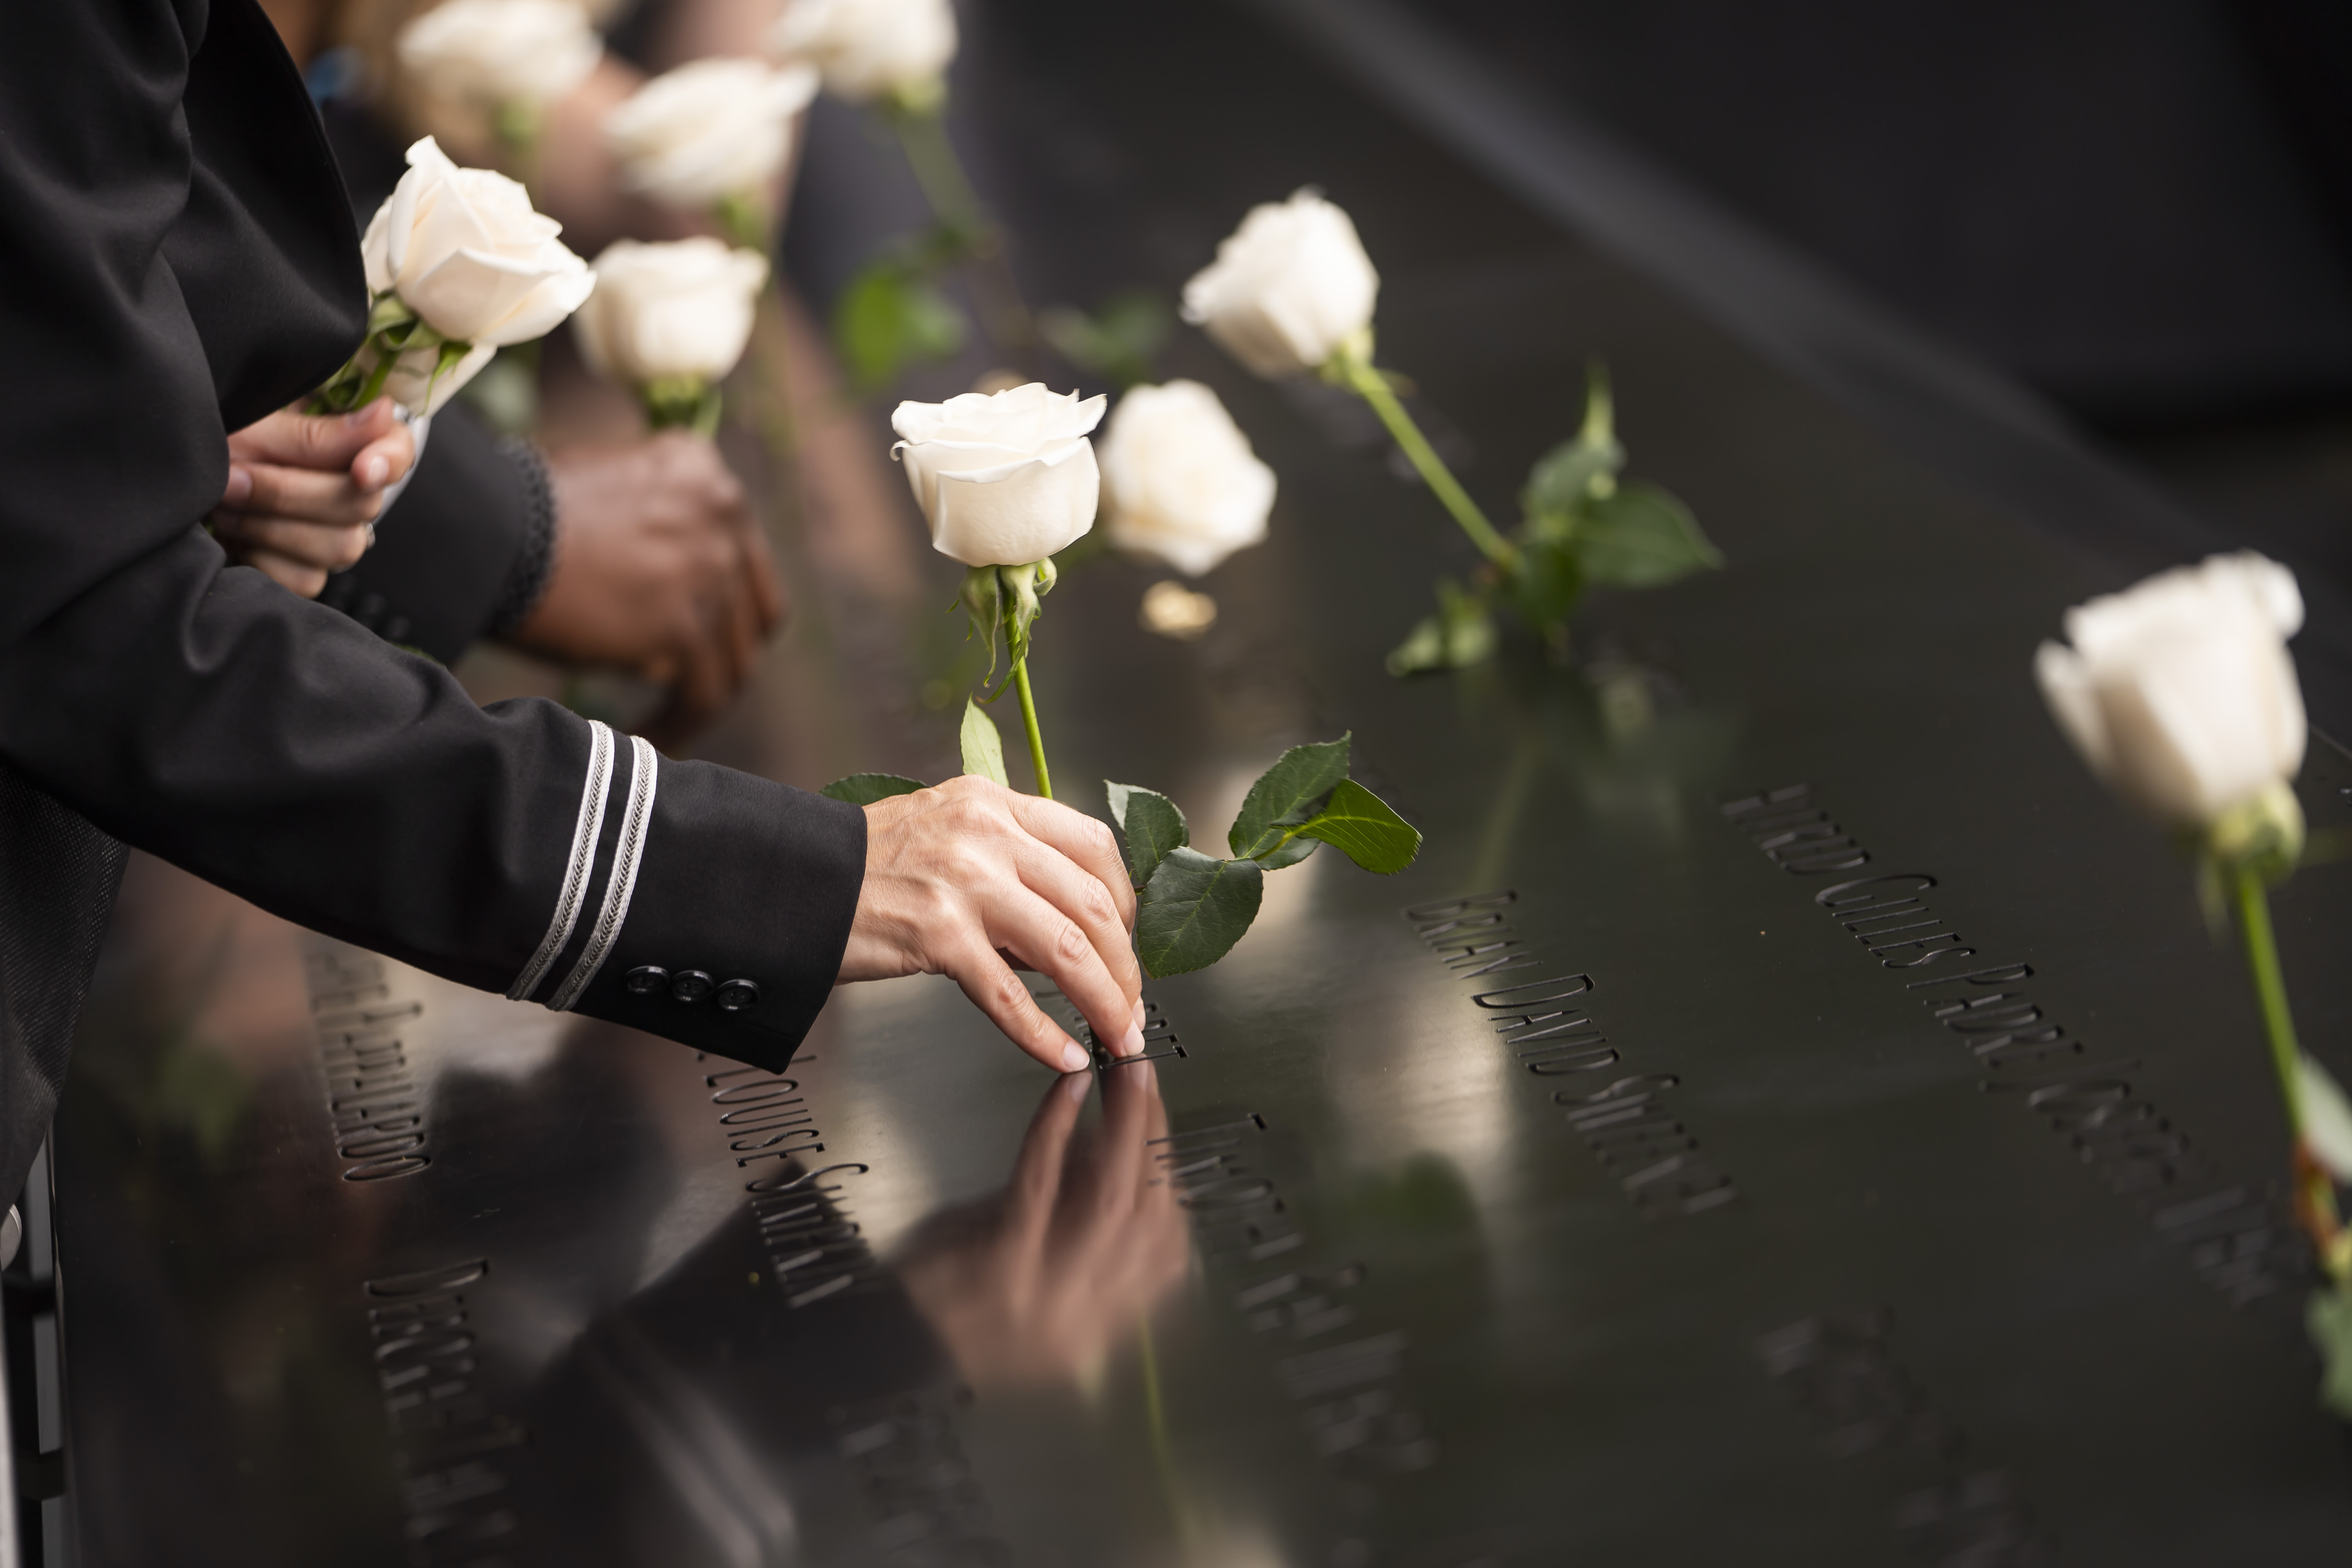 In this close up shot ot the 9/11 Memorial names parapet, a man's arm is shown from the elbow down as he places a white rose inside a victim's name on the Memorial. 